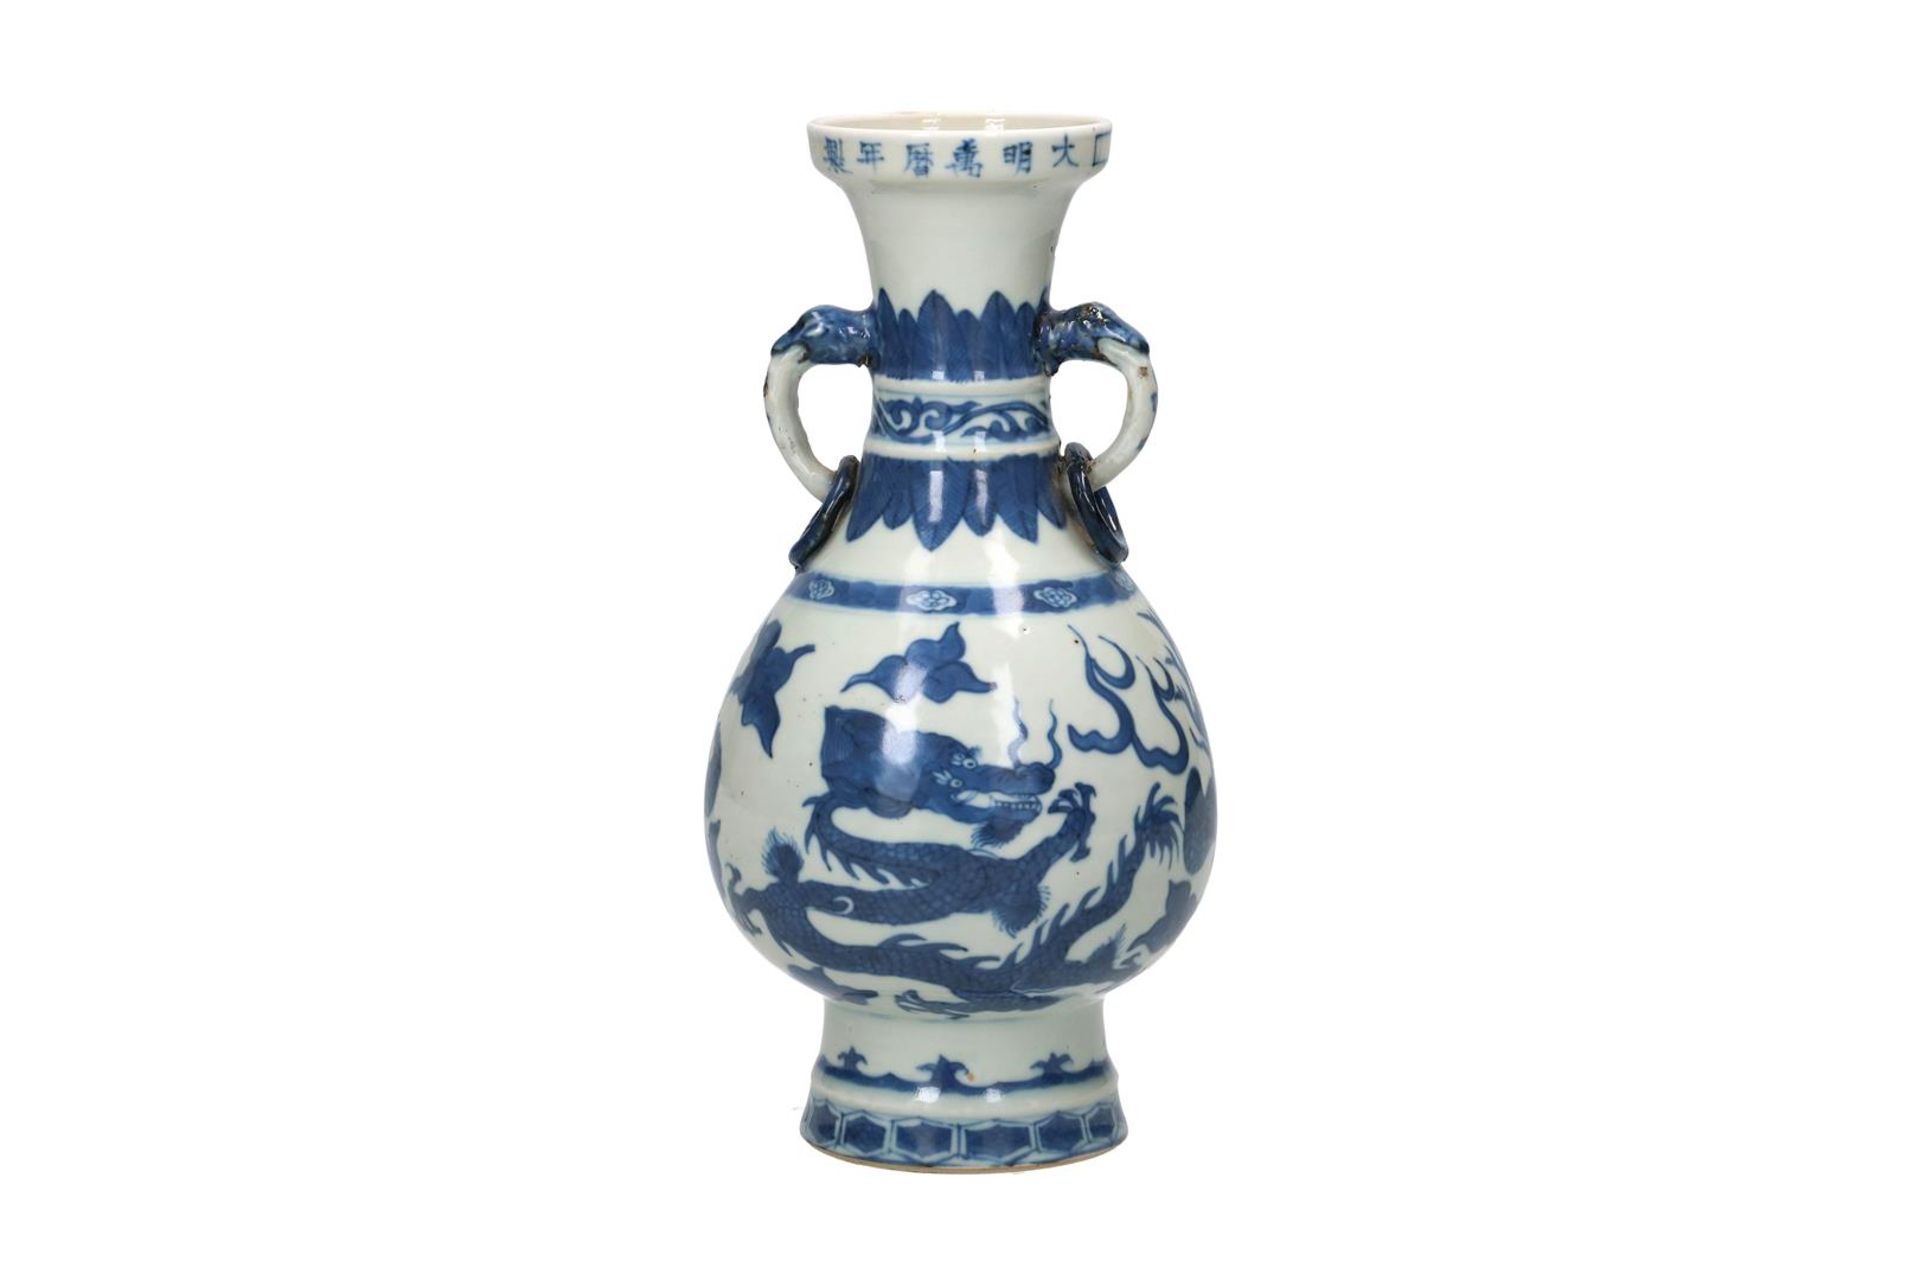 A blue and white porcelain vase, with two handles with rings in the shape of animals and a